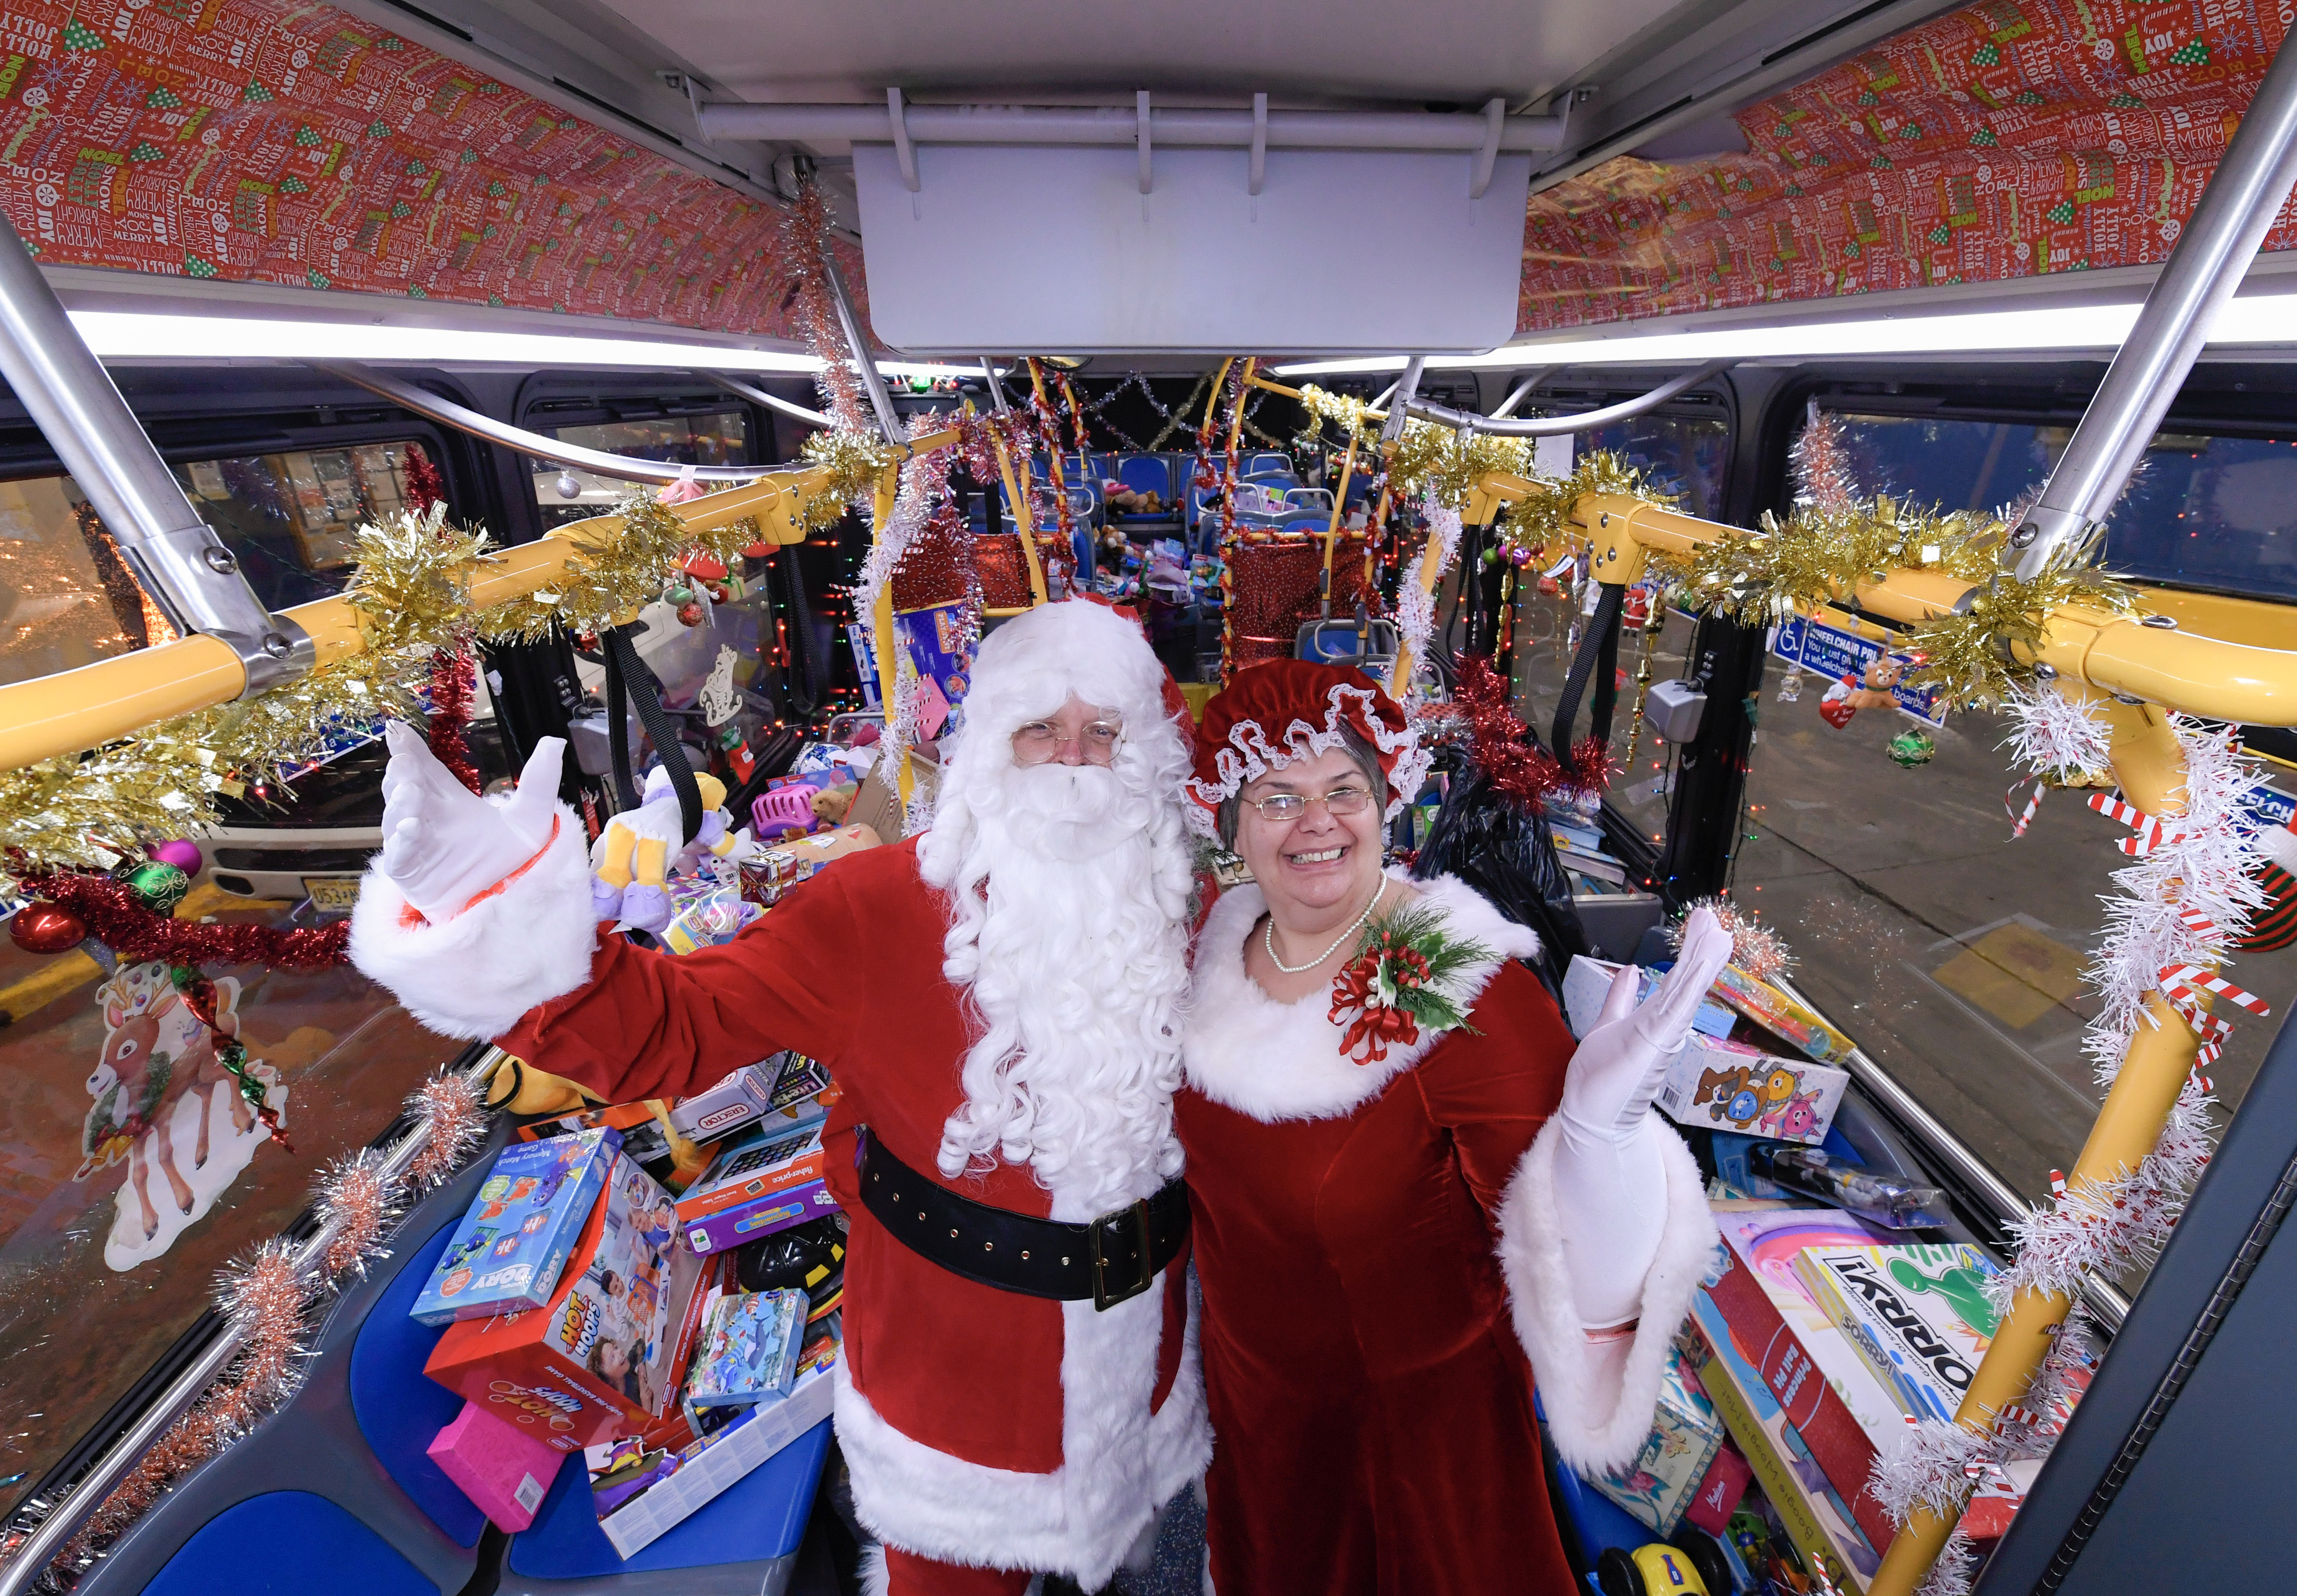 The MTA joined with Kids Against Cancer to collect toys from Staten Island bus depots, which were delivered by Santa and Mrs. Claus aboard a special bus, branded “Santa’s Express” on Fri., December 17, 2021.